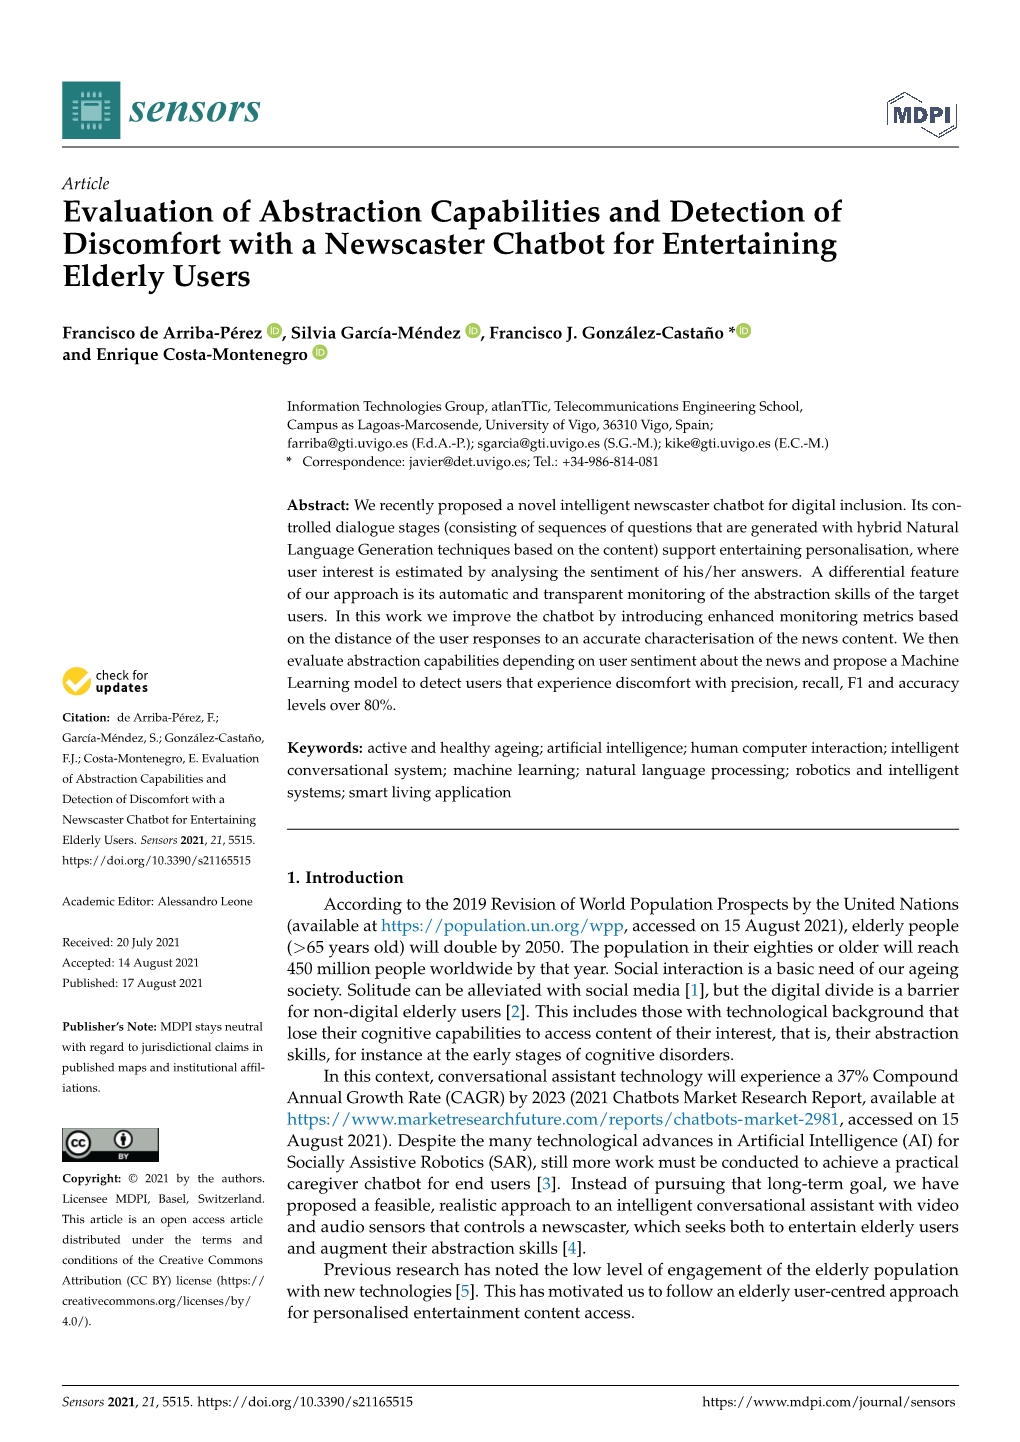 Evaluation of Abstraction Capabilities and Detection of Discomfort with a Newscaster Chatbot for Entertaining Elderly Users